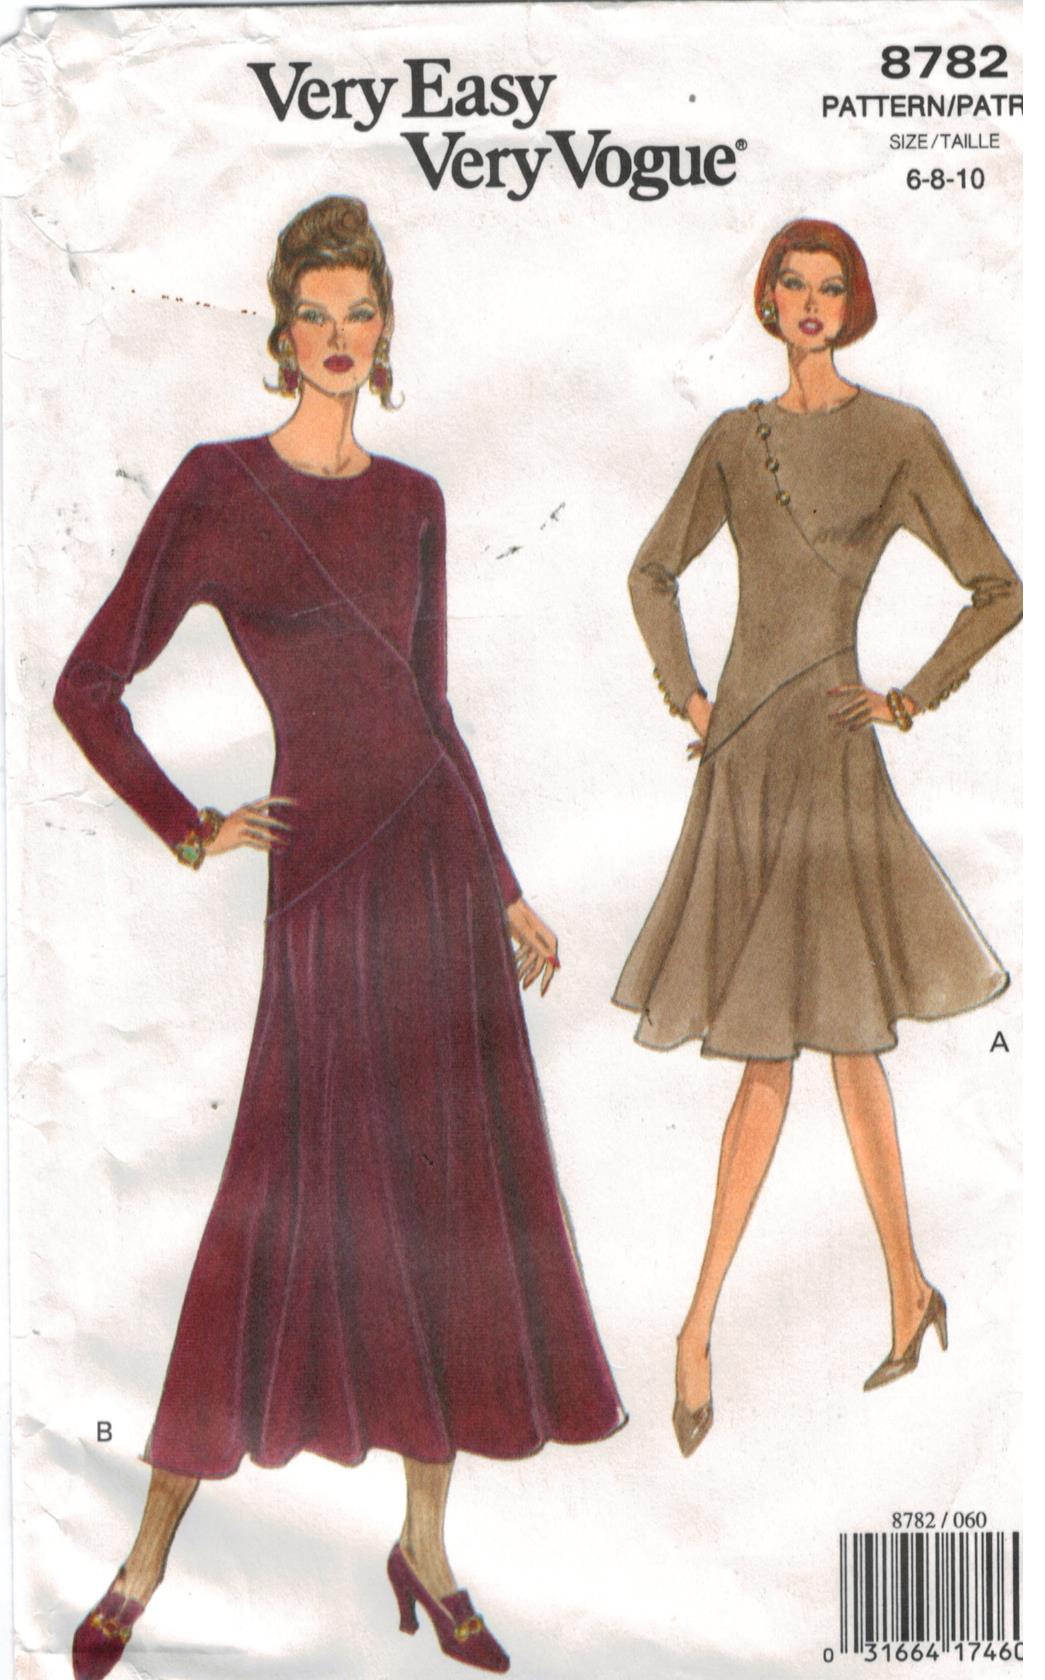 Vogue 2894 Sewing Pattern Misses Easy Dress in Two Lengths Knit